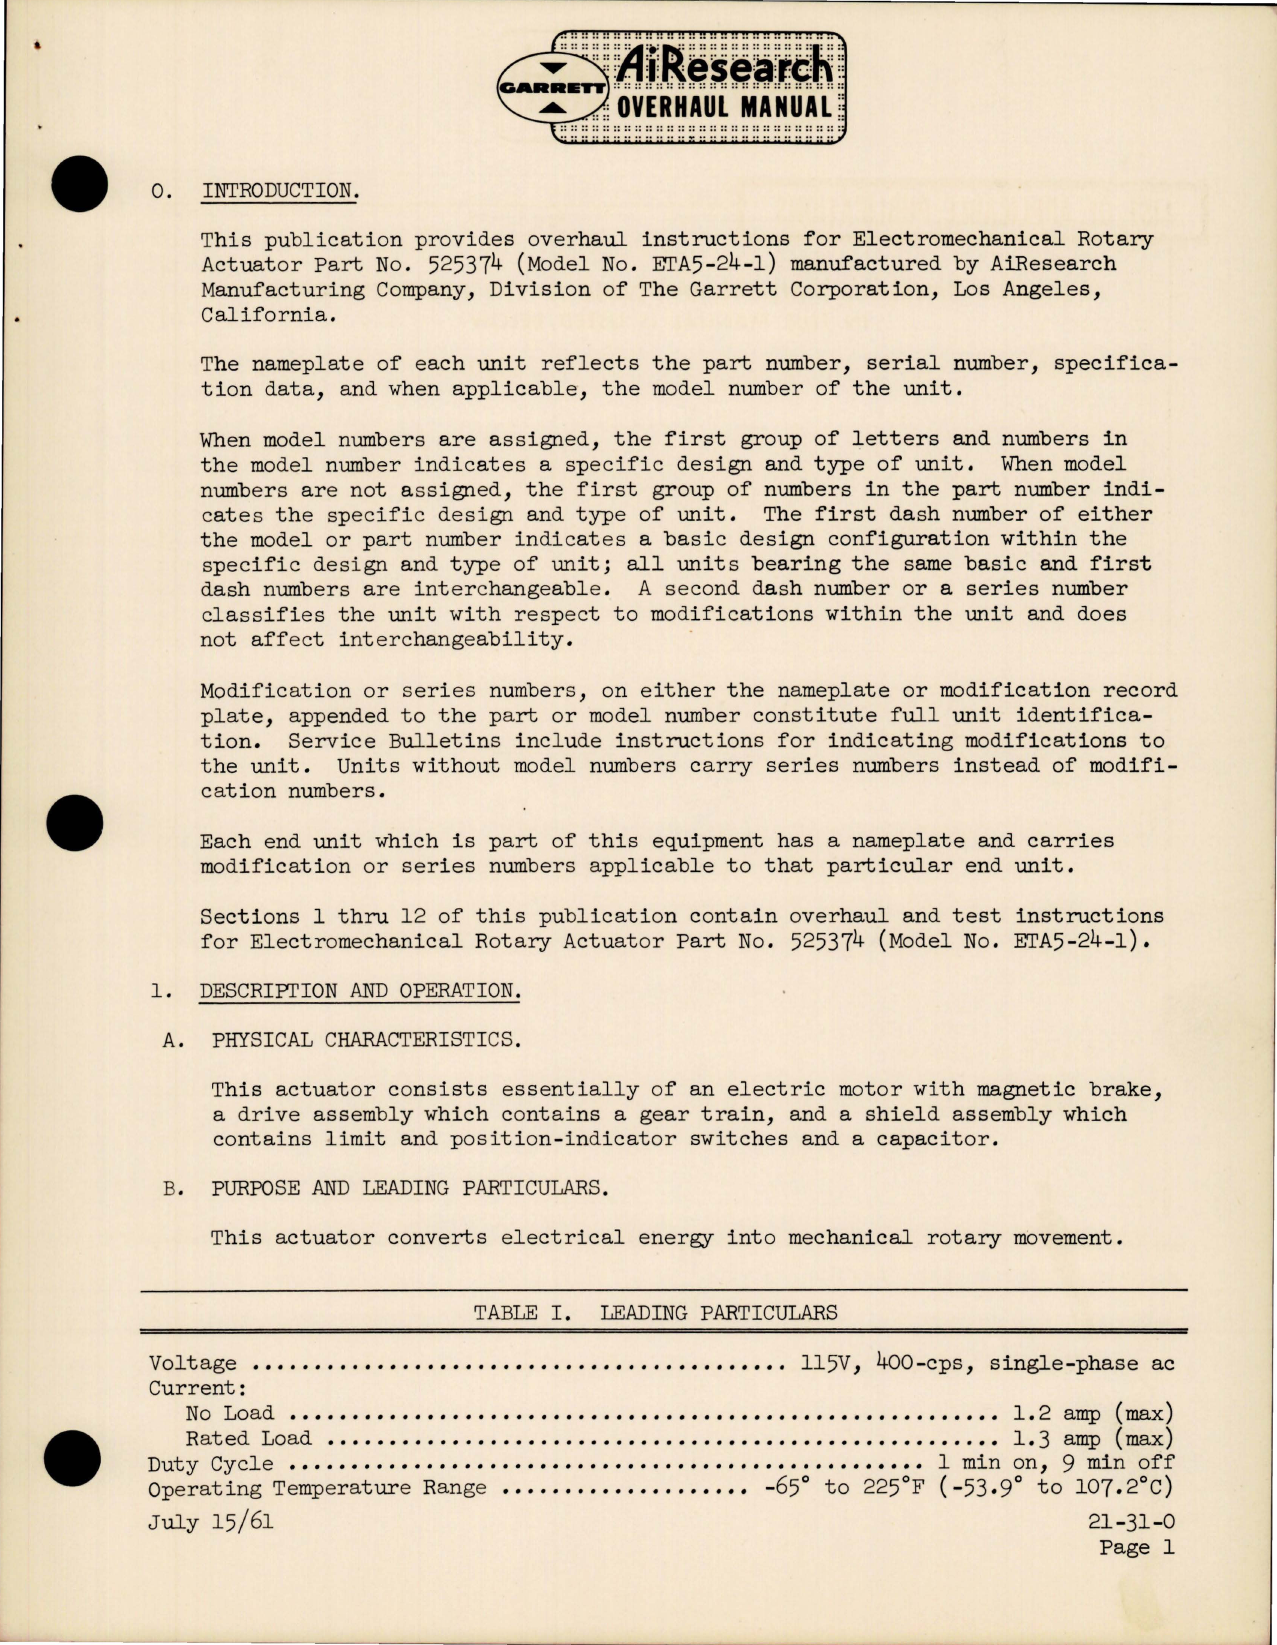 Sample page 5 from AirCorps Library document: Overhaul Manual for Electromechanical Rotary Actuator - Part 525374 